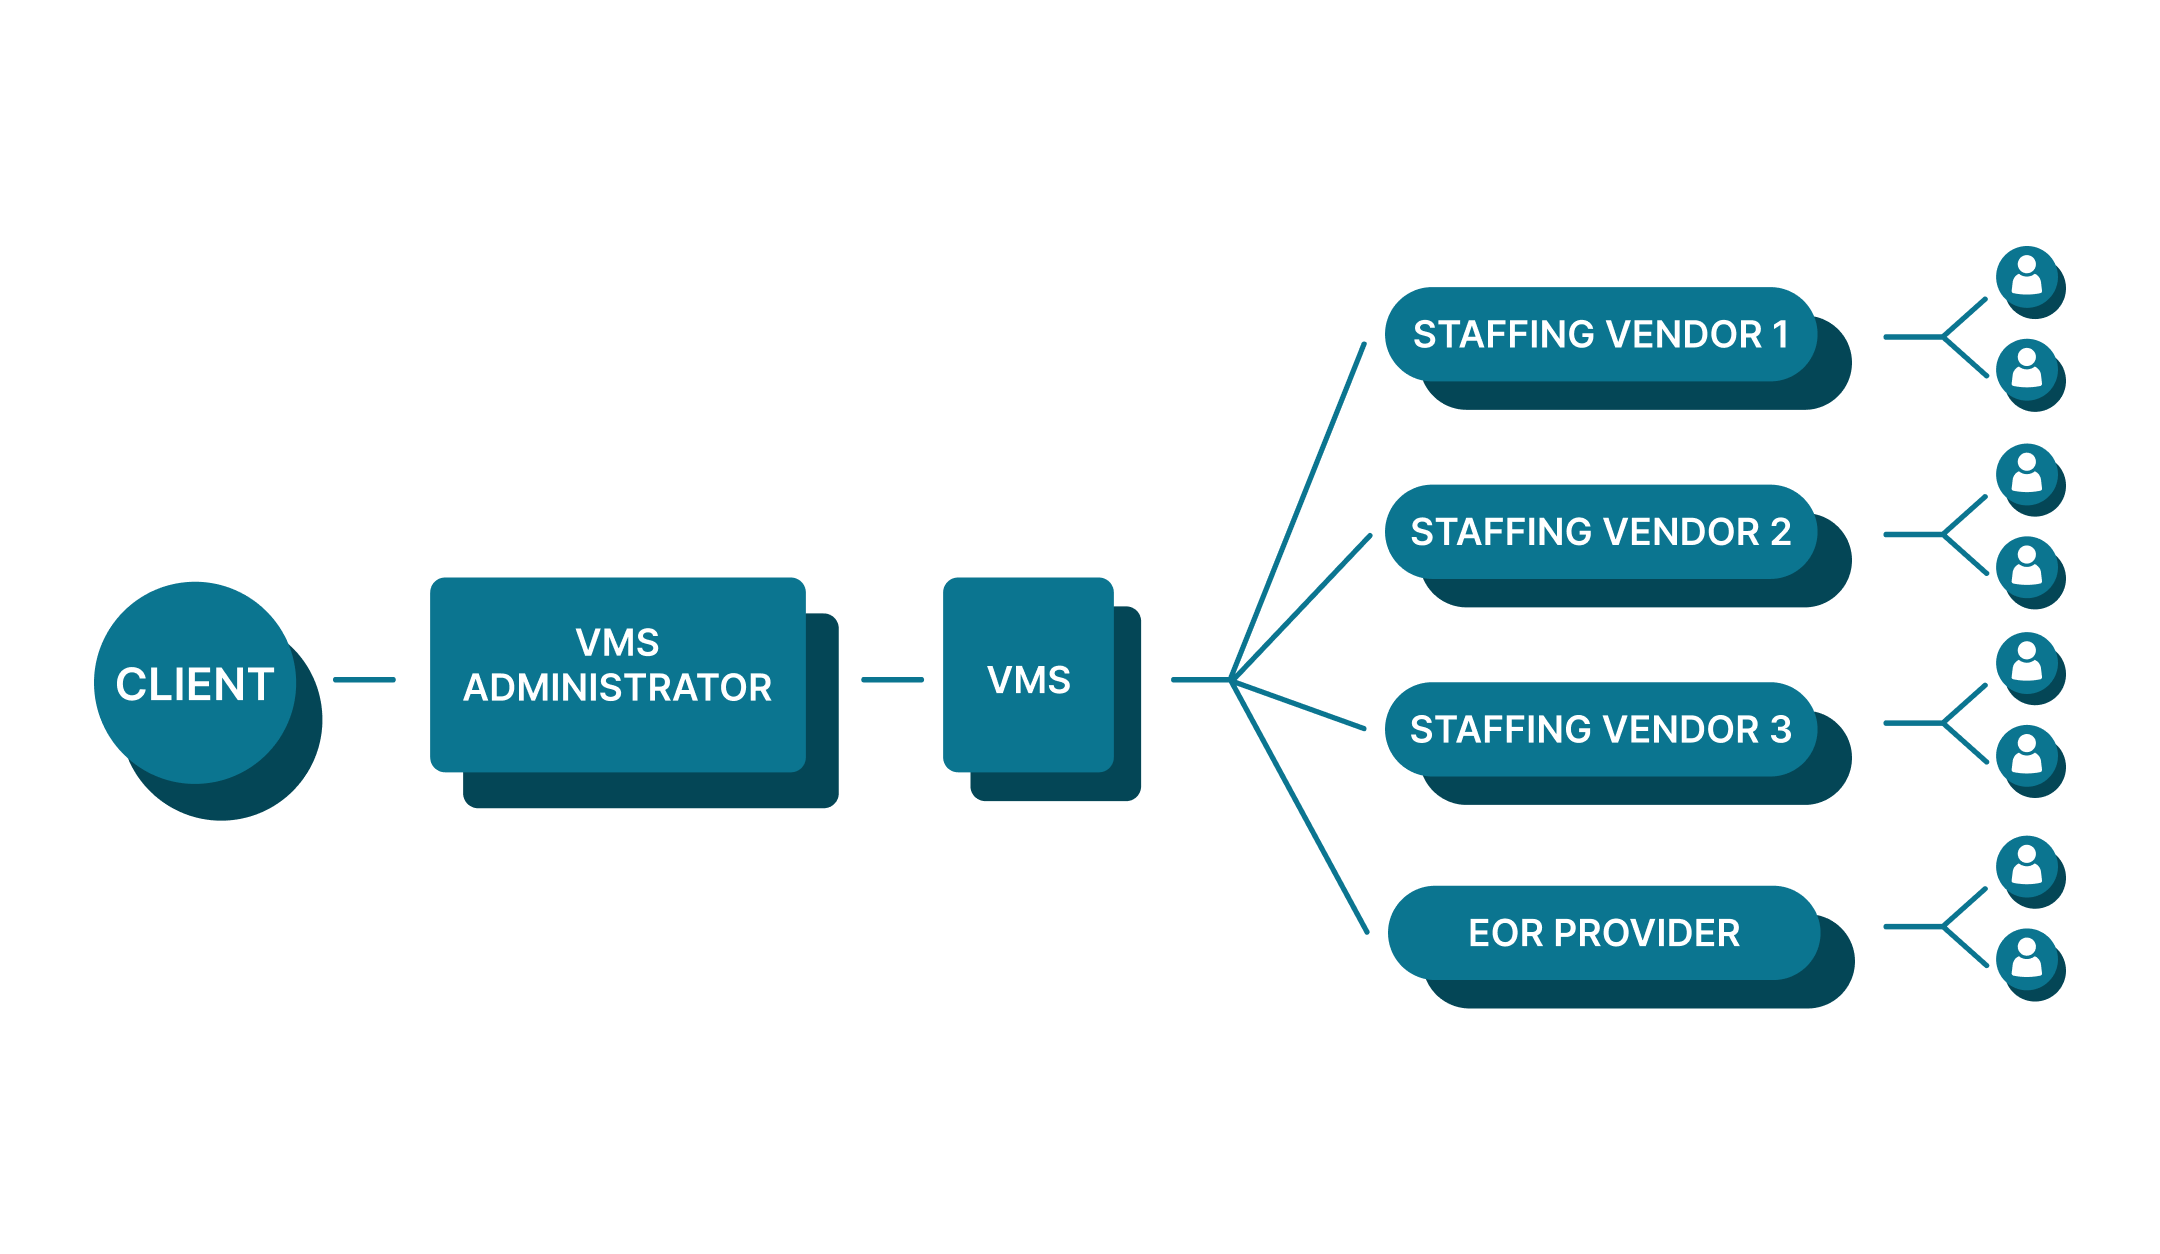 Now Available: Understanding the VMS Landscape